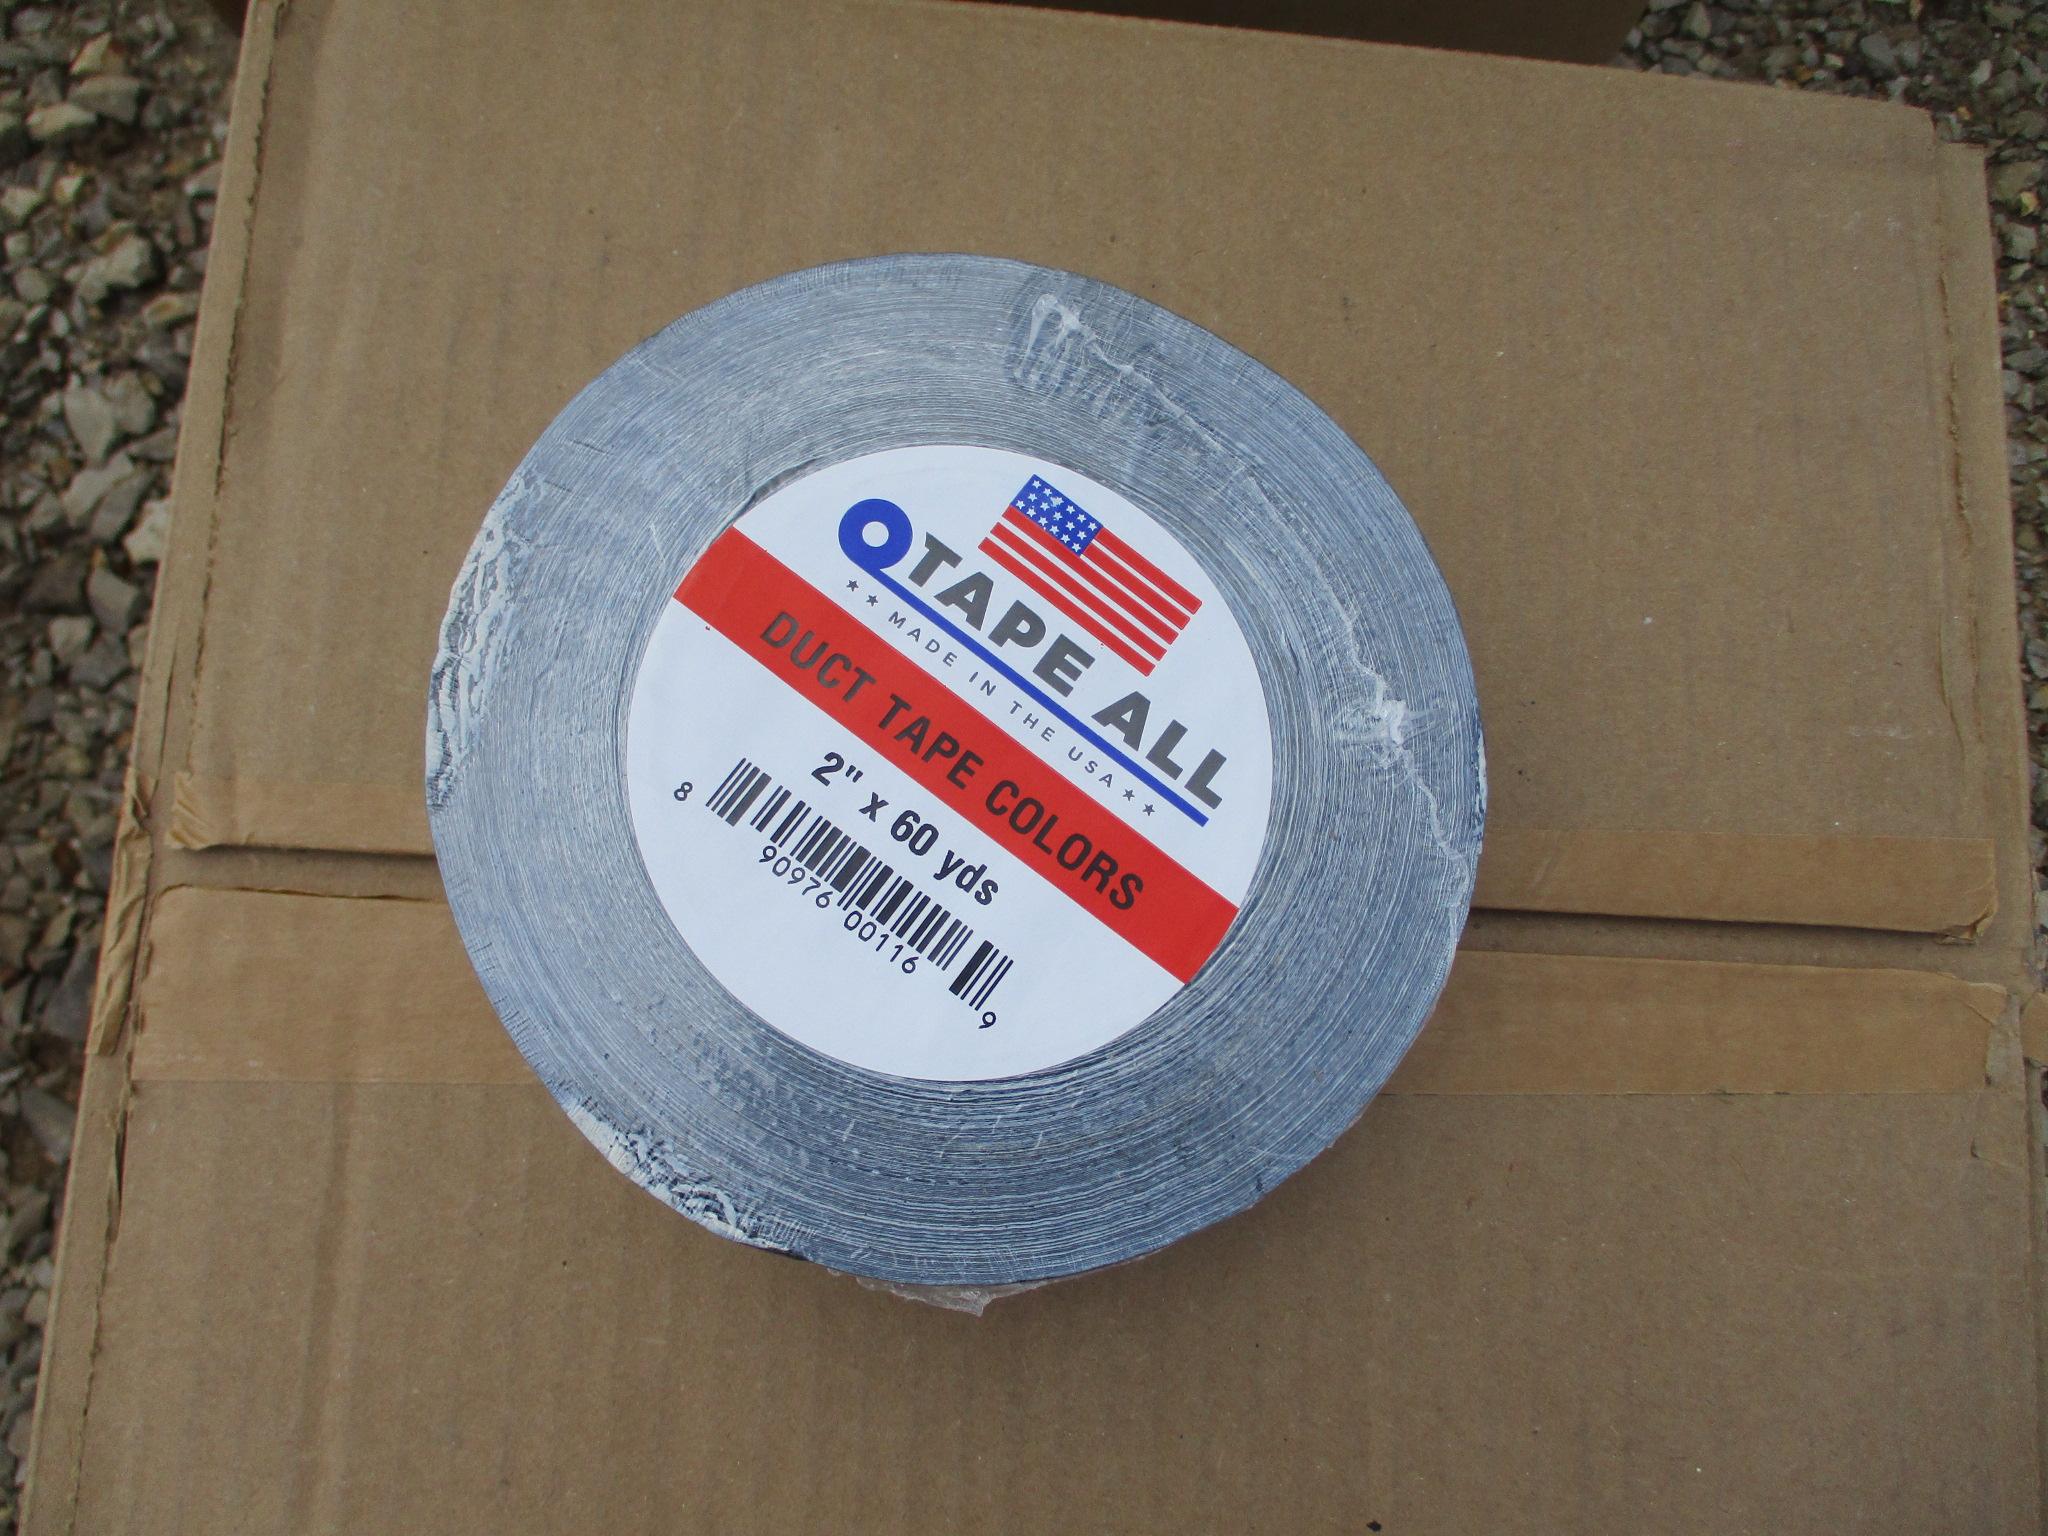 (24) Rolls of Duct Tape